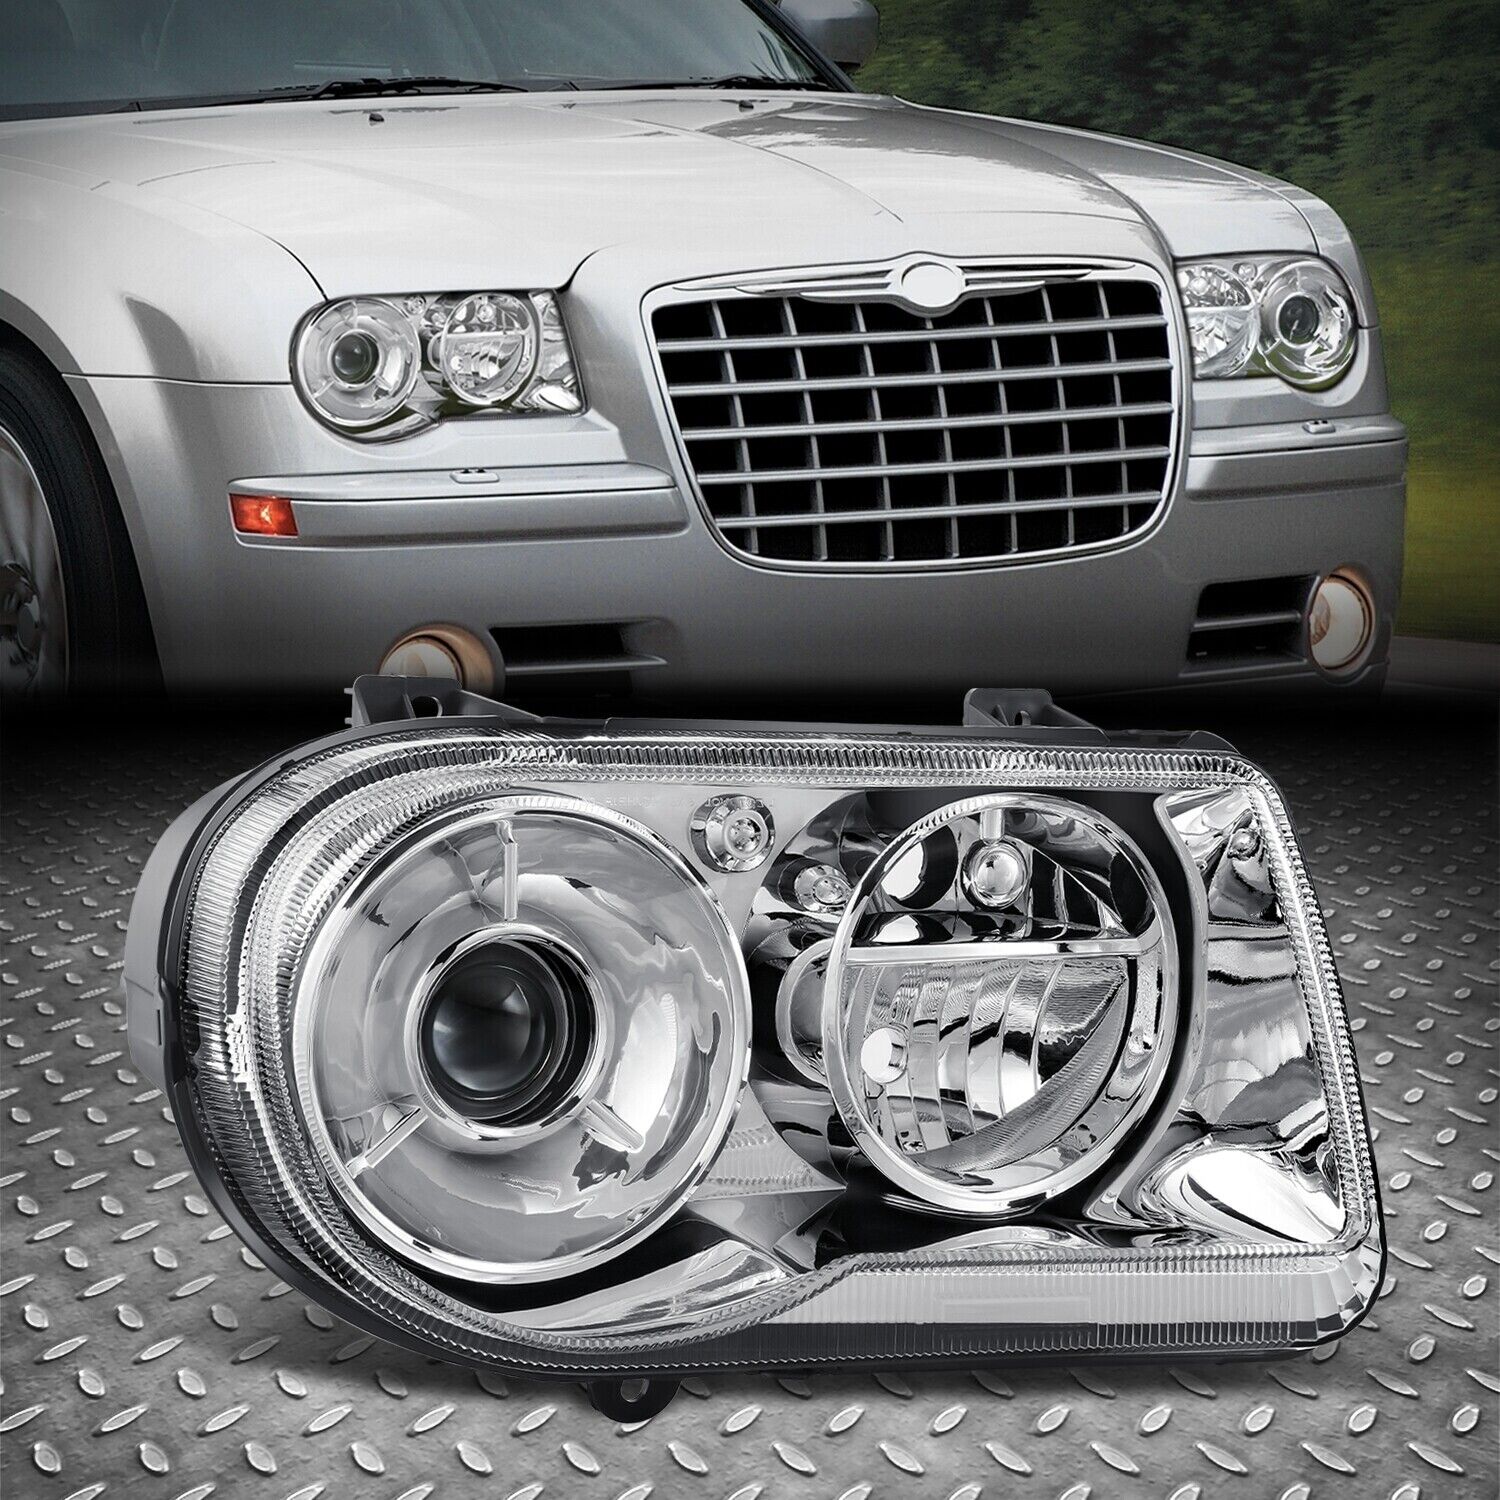 For 05-10 Chrysler 300 Dodge Charger Magnum Right Side Projector Headlight Lamp